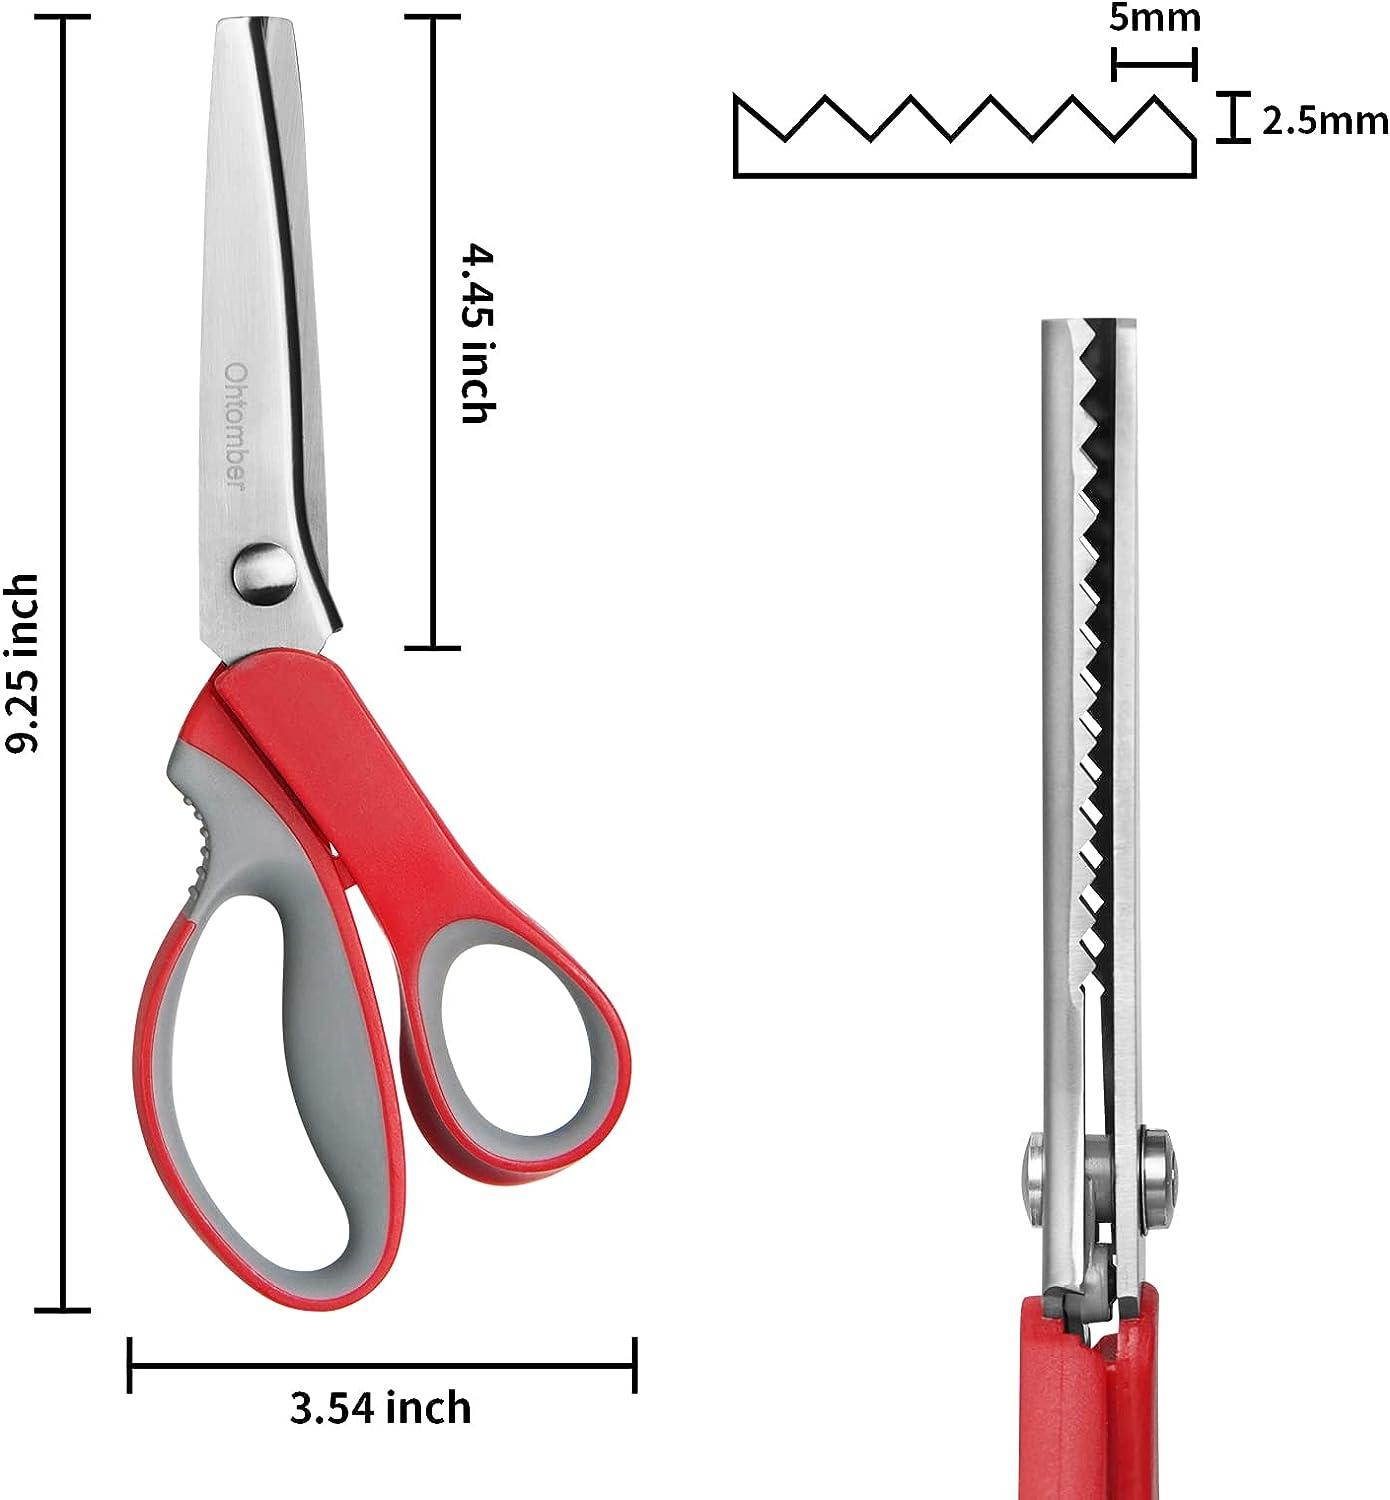 Ohtomber Pinking Shears Craft Scissors - 9 Stainless Steel Pinking Shears Scissors  for Fabric Cutting Professional Fabric Craft Scissors Decorative Zig Zag  Sewing Cutter Scissors with Comfort Grips 1 Red